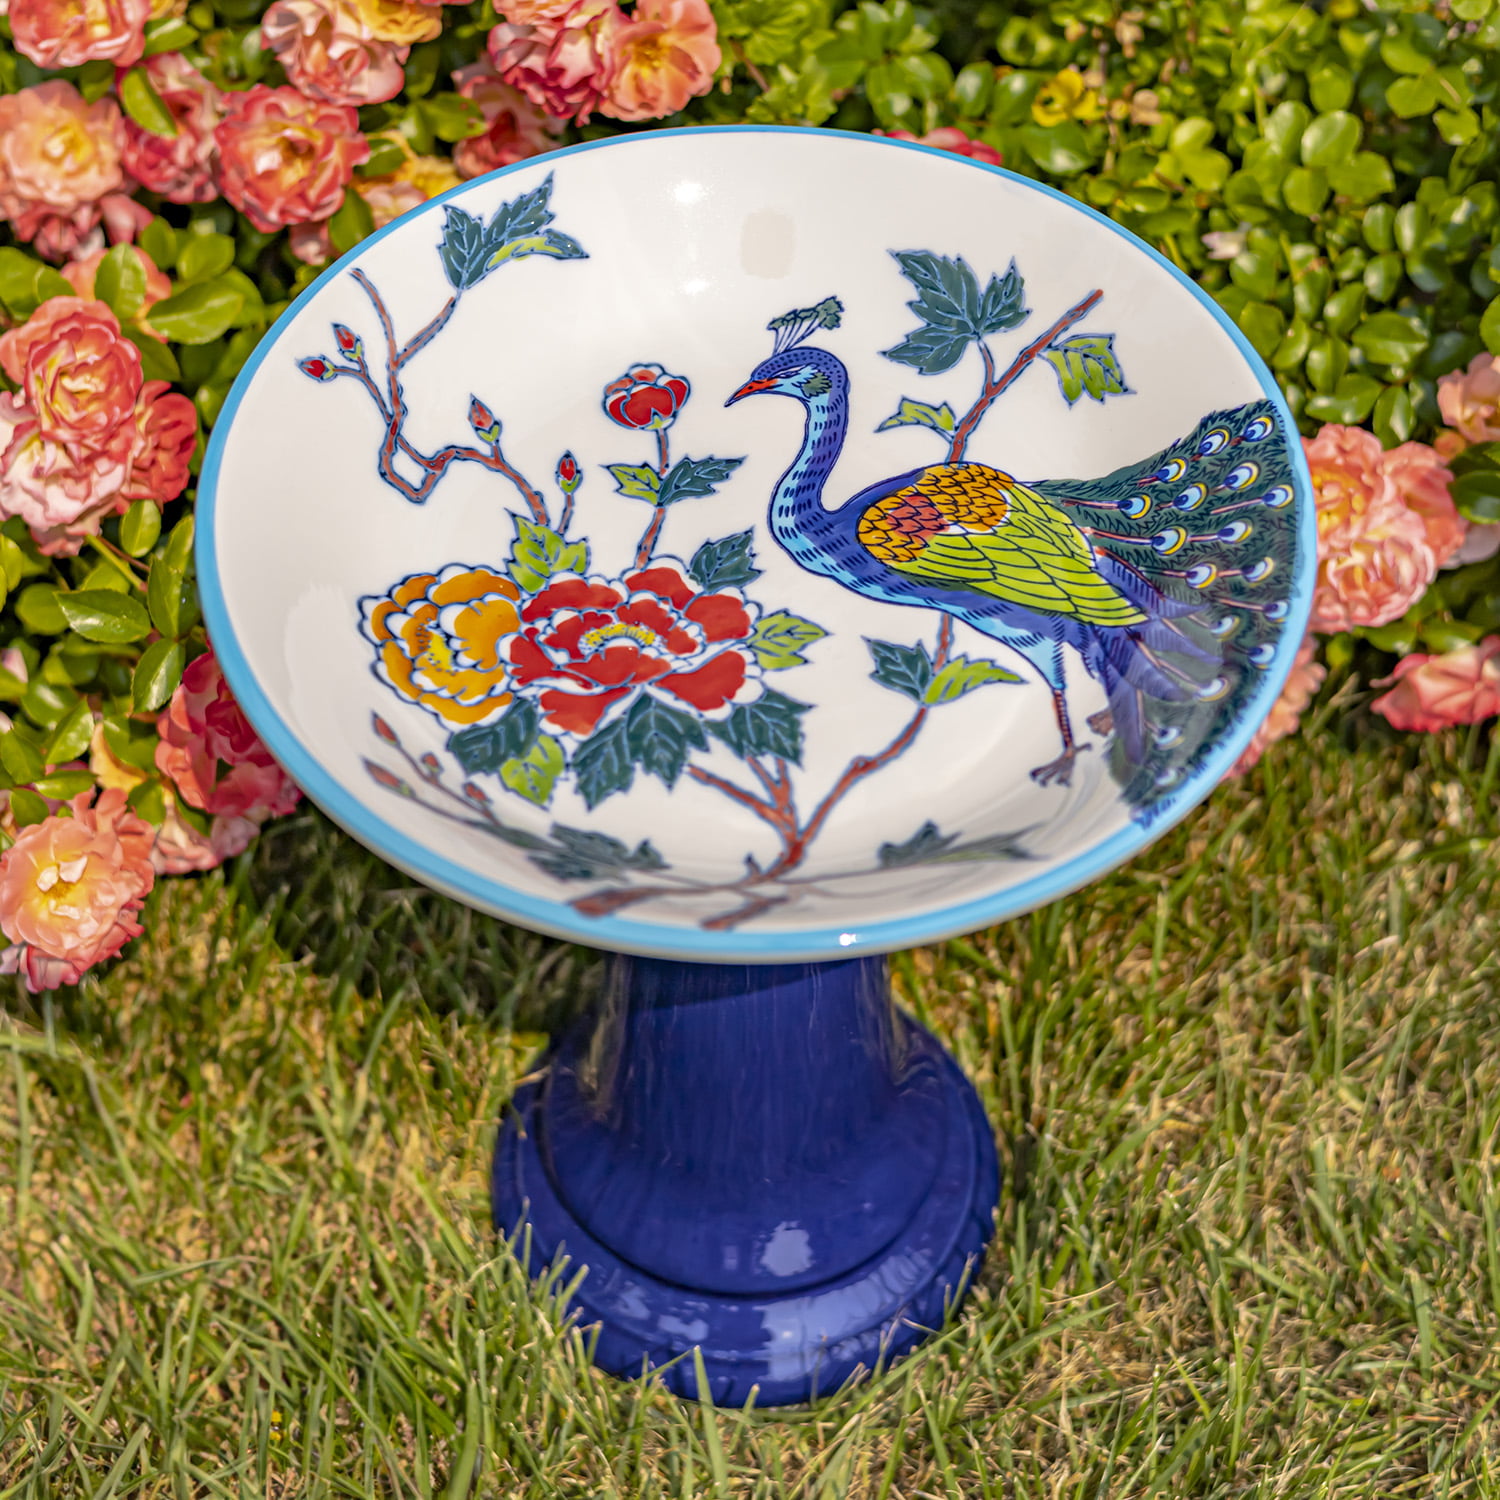 A good birdbath brings song and beauty to your area. Invest